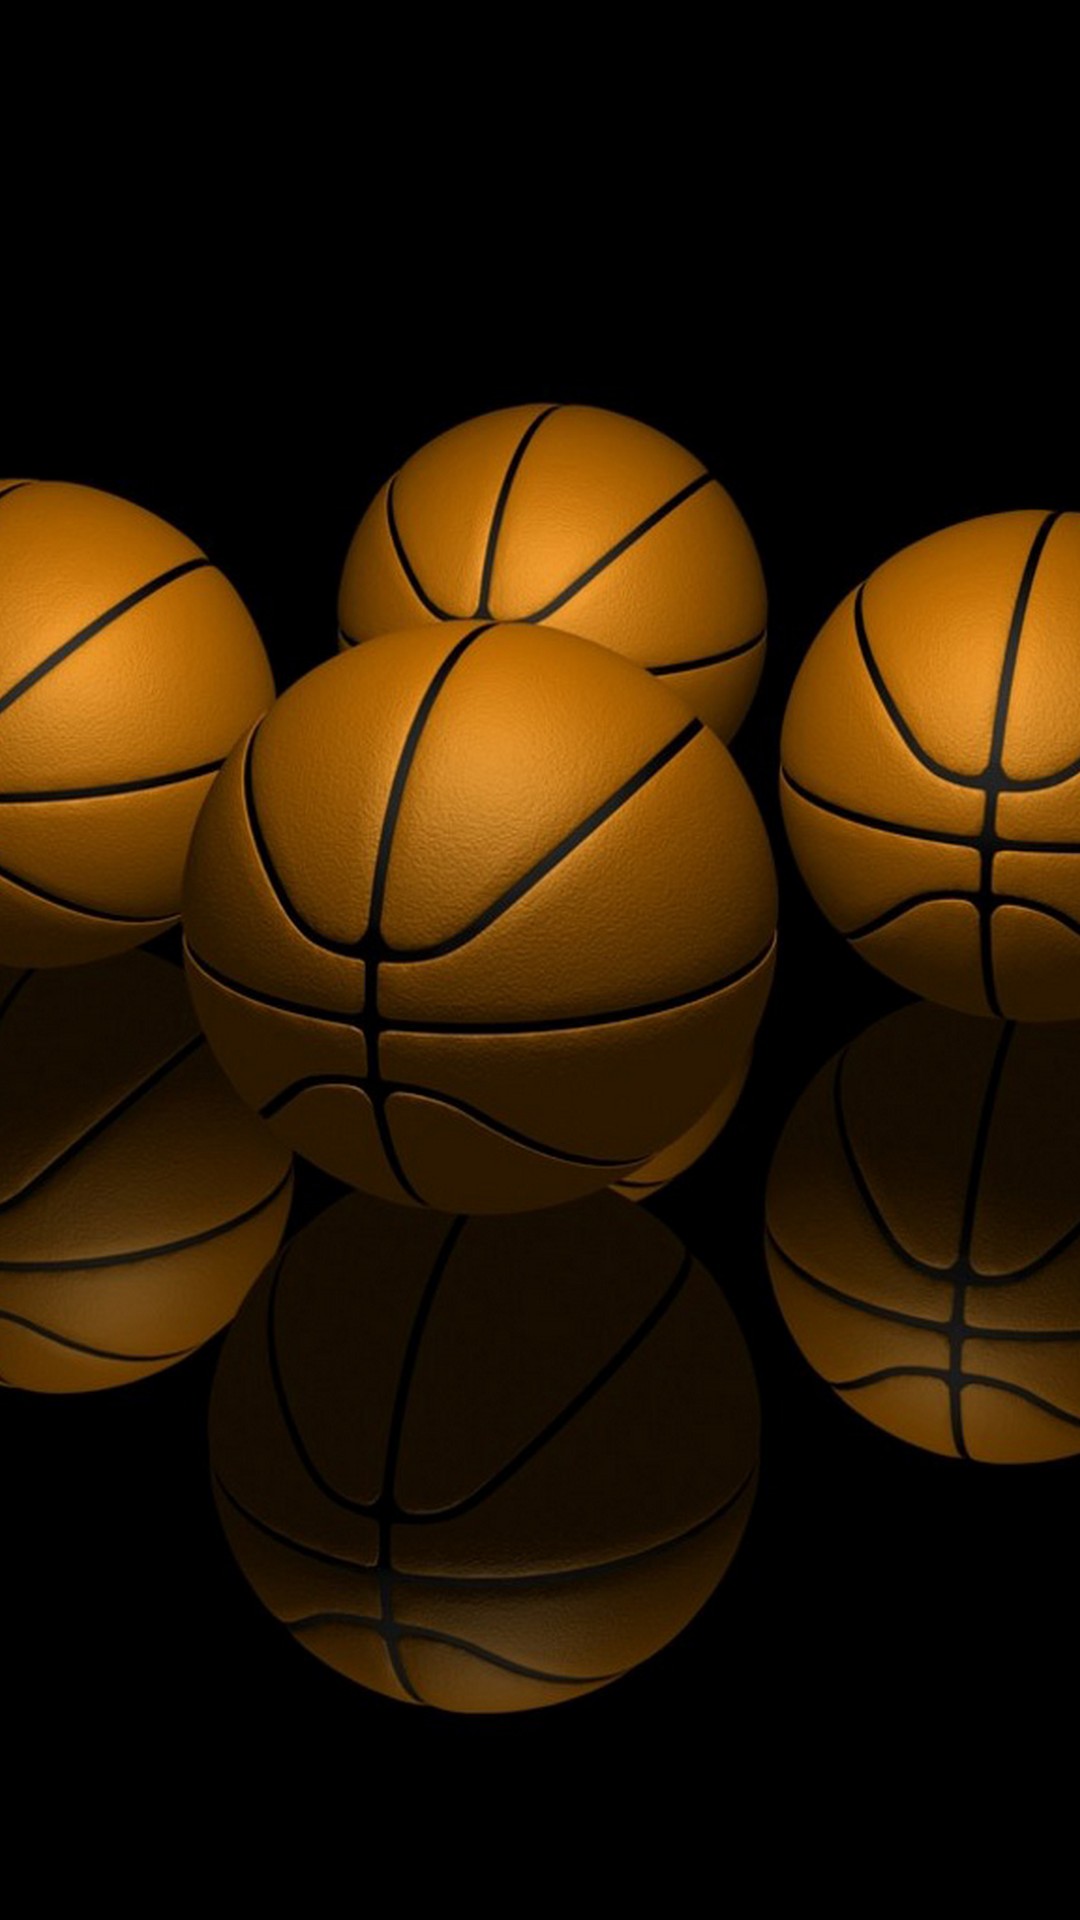 Basketball Games iPhone 8 Wallpaper with image dimensions 1080x1920 pixel. You can make this wallpaper for your Desktop Computer Backgrounds, Windows or Mac Screensavers, iPhone Lock screen, Tablet or Android and another Mobile Phone device